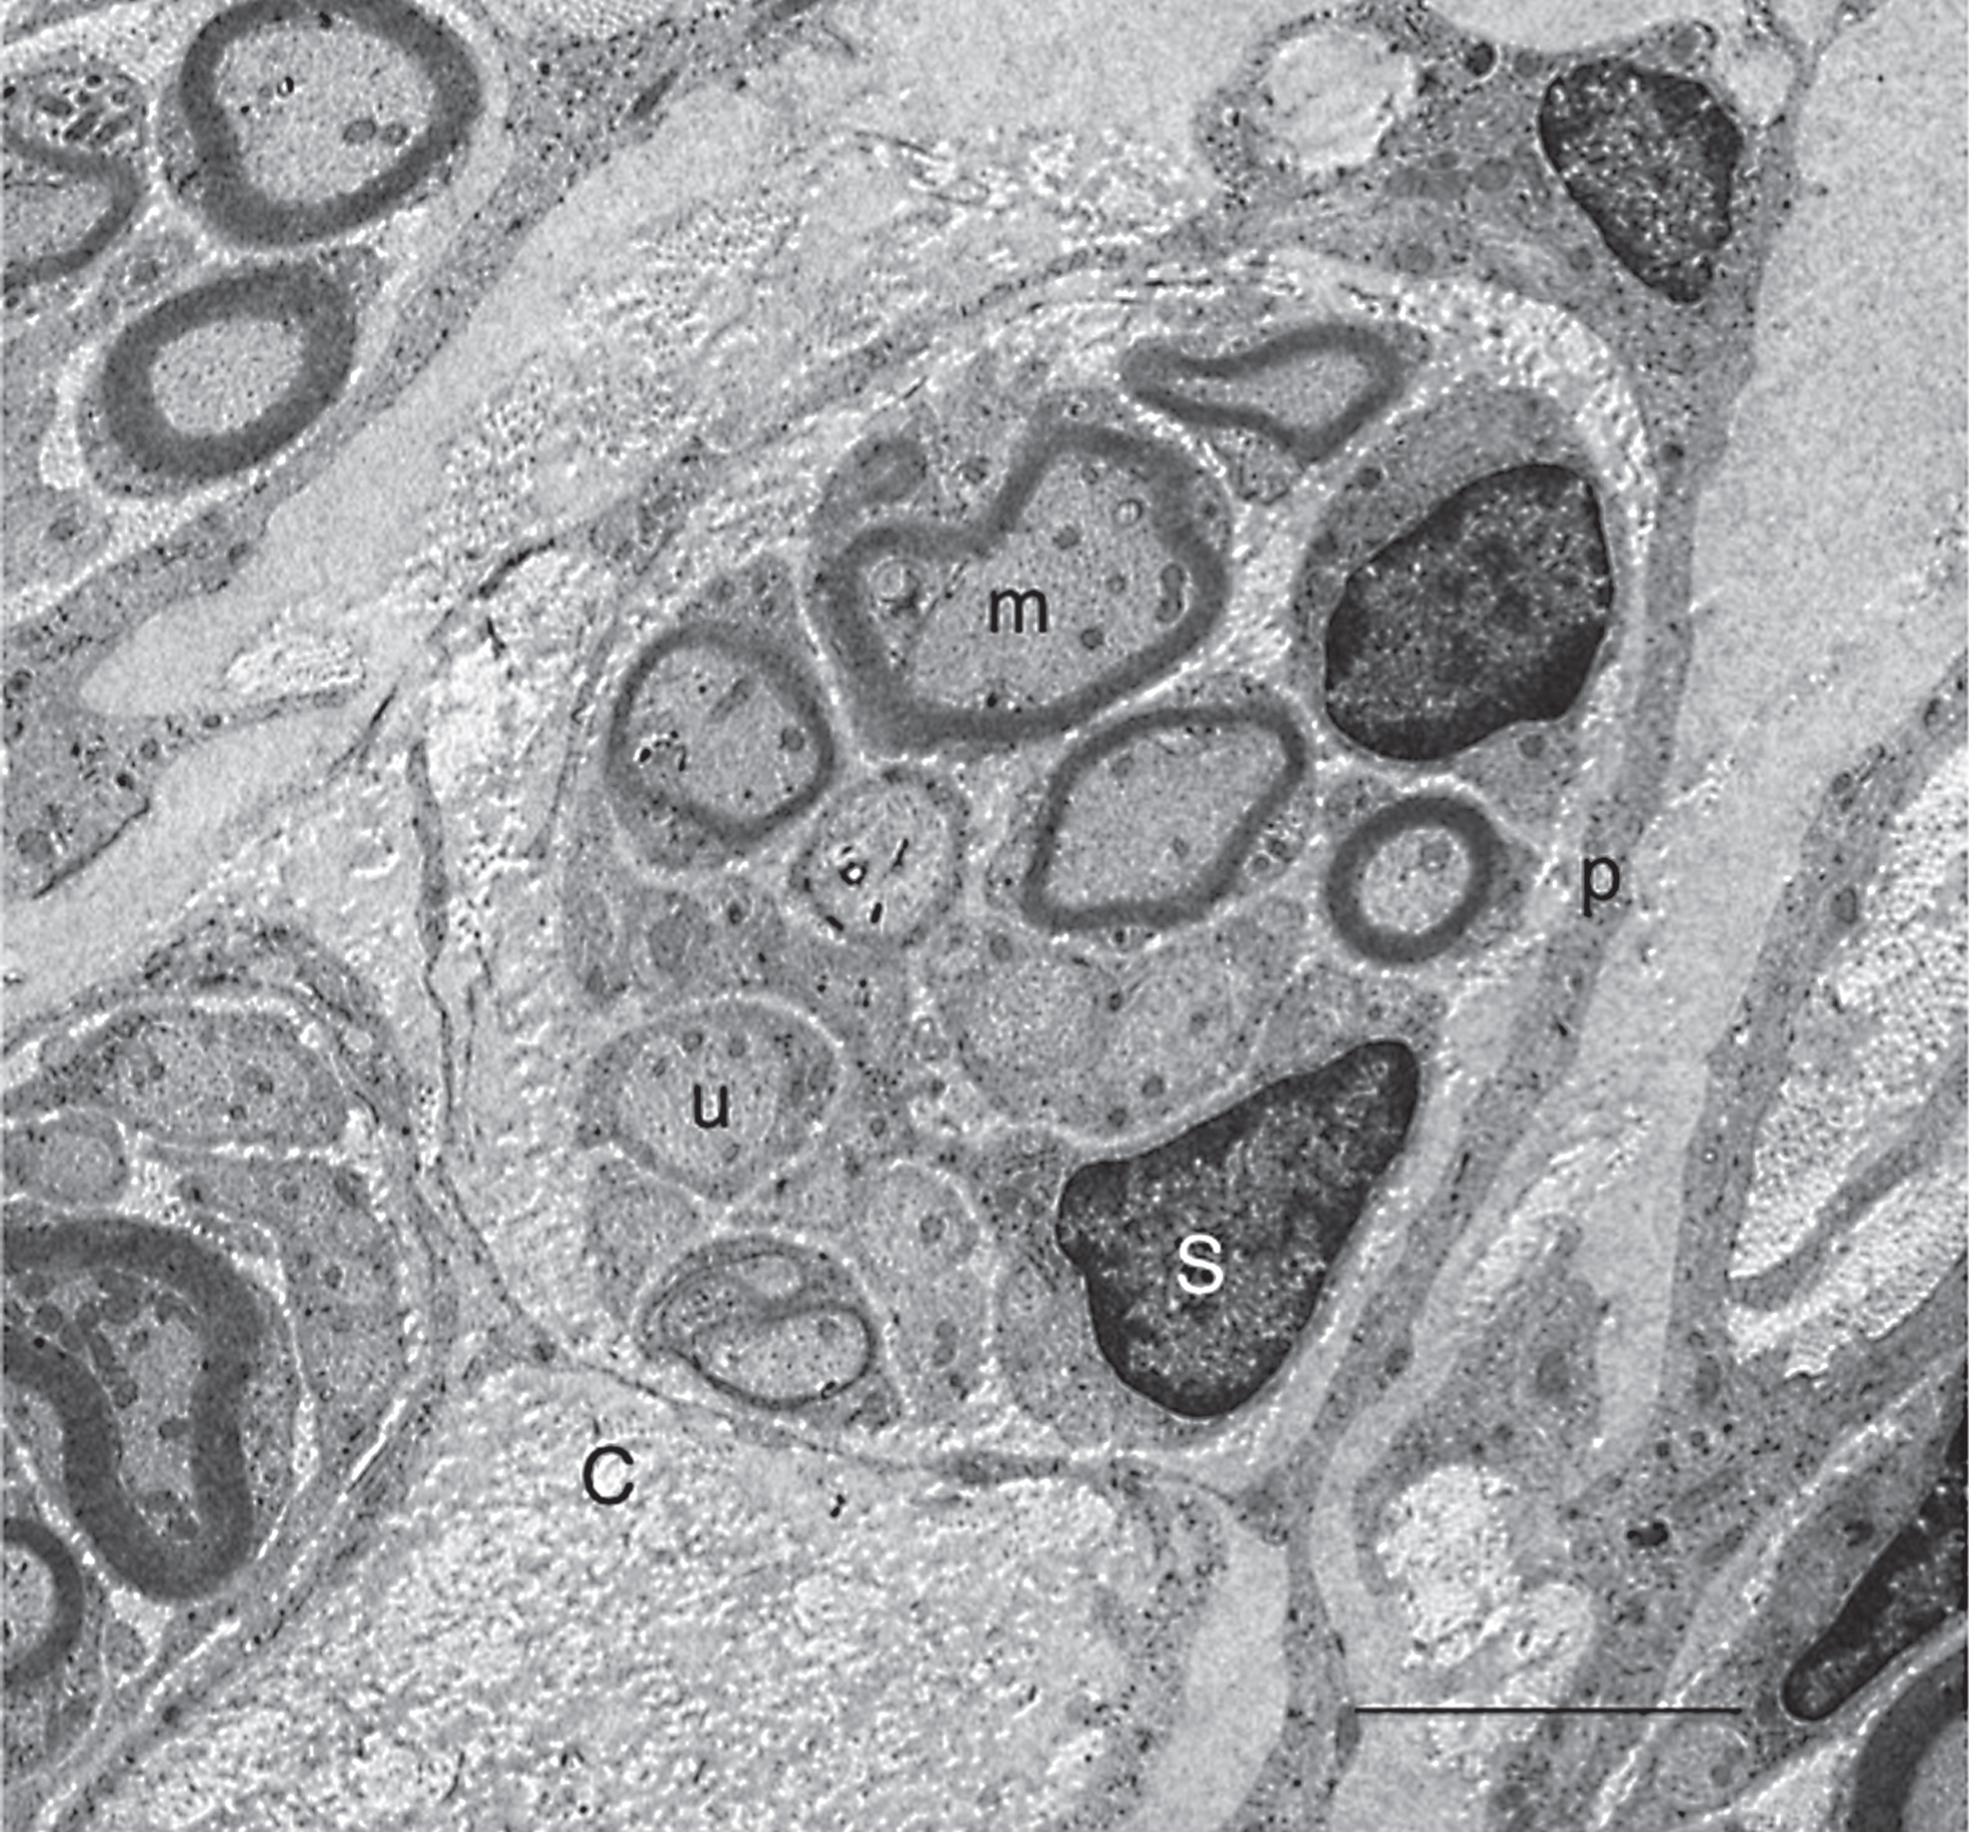 Conventional electron microscopy of axons in the astrocyte-devoid areas. 5 w-TP. This electron micrograph was taken from the astrocyte-devoid area of the spinal cord at 5 w-TP. Myelinated (m) and unmyelinated (u) axons are bundled, and surrounded by perineural sheaths (p). Axons are associated with Schwann cells (S). All these cellular components are embedded in the collagen fibril matrices (C). Scale: 5 μm.